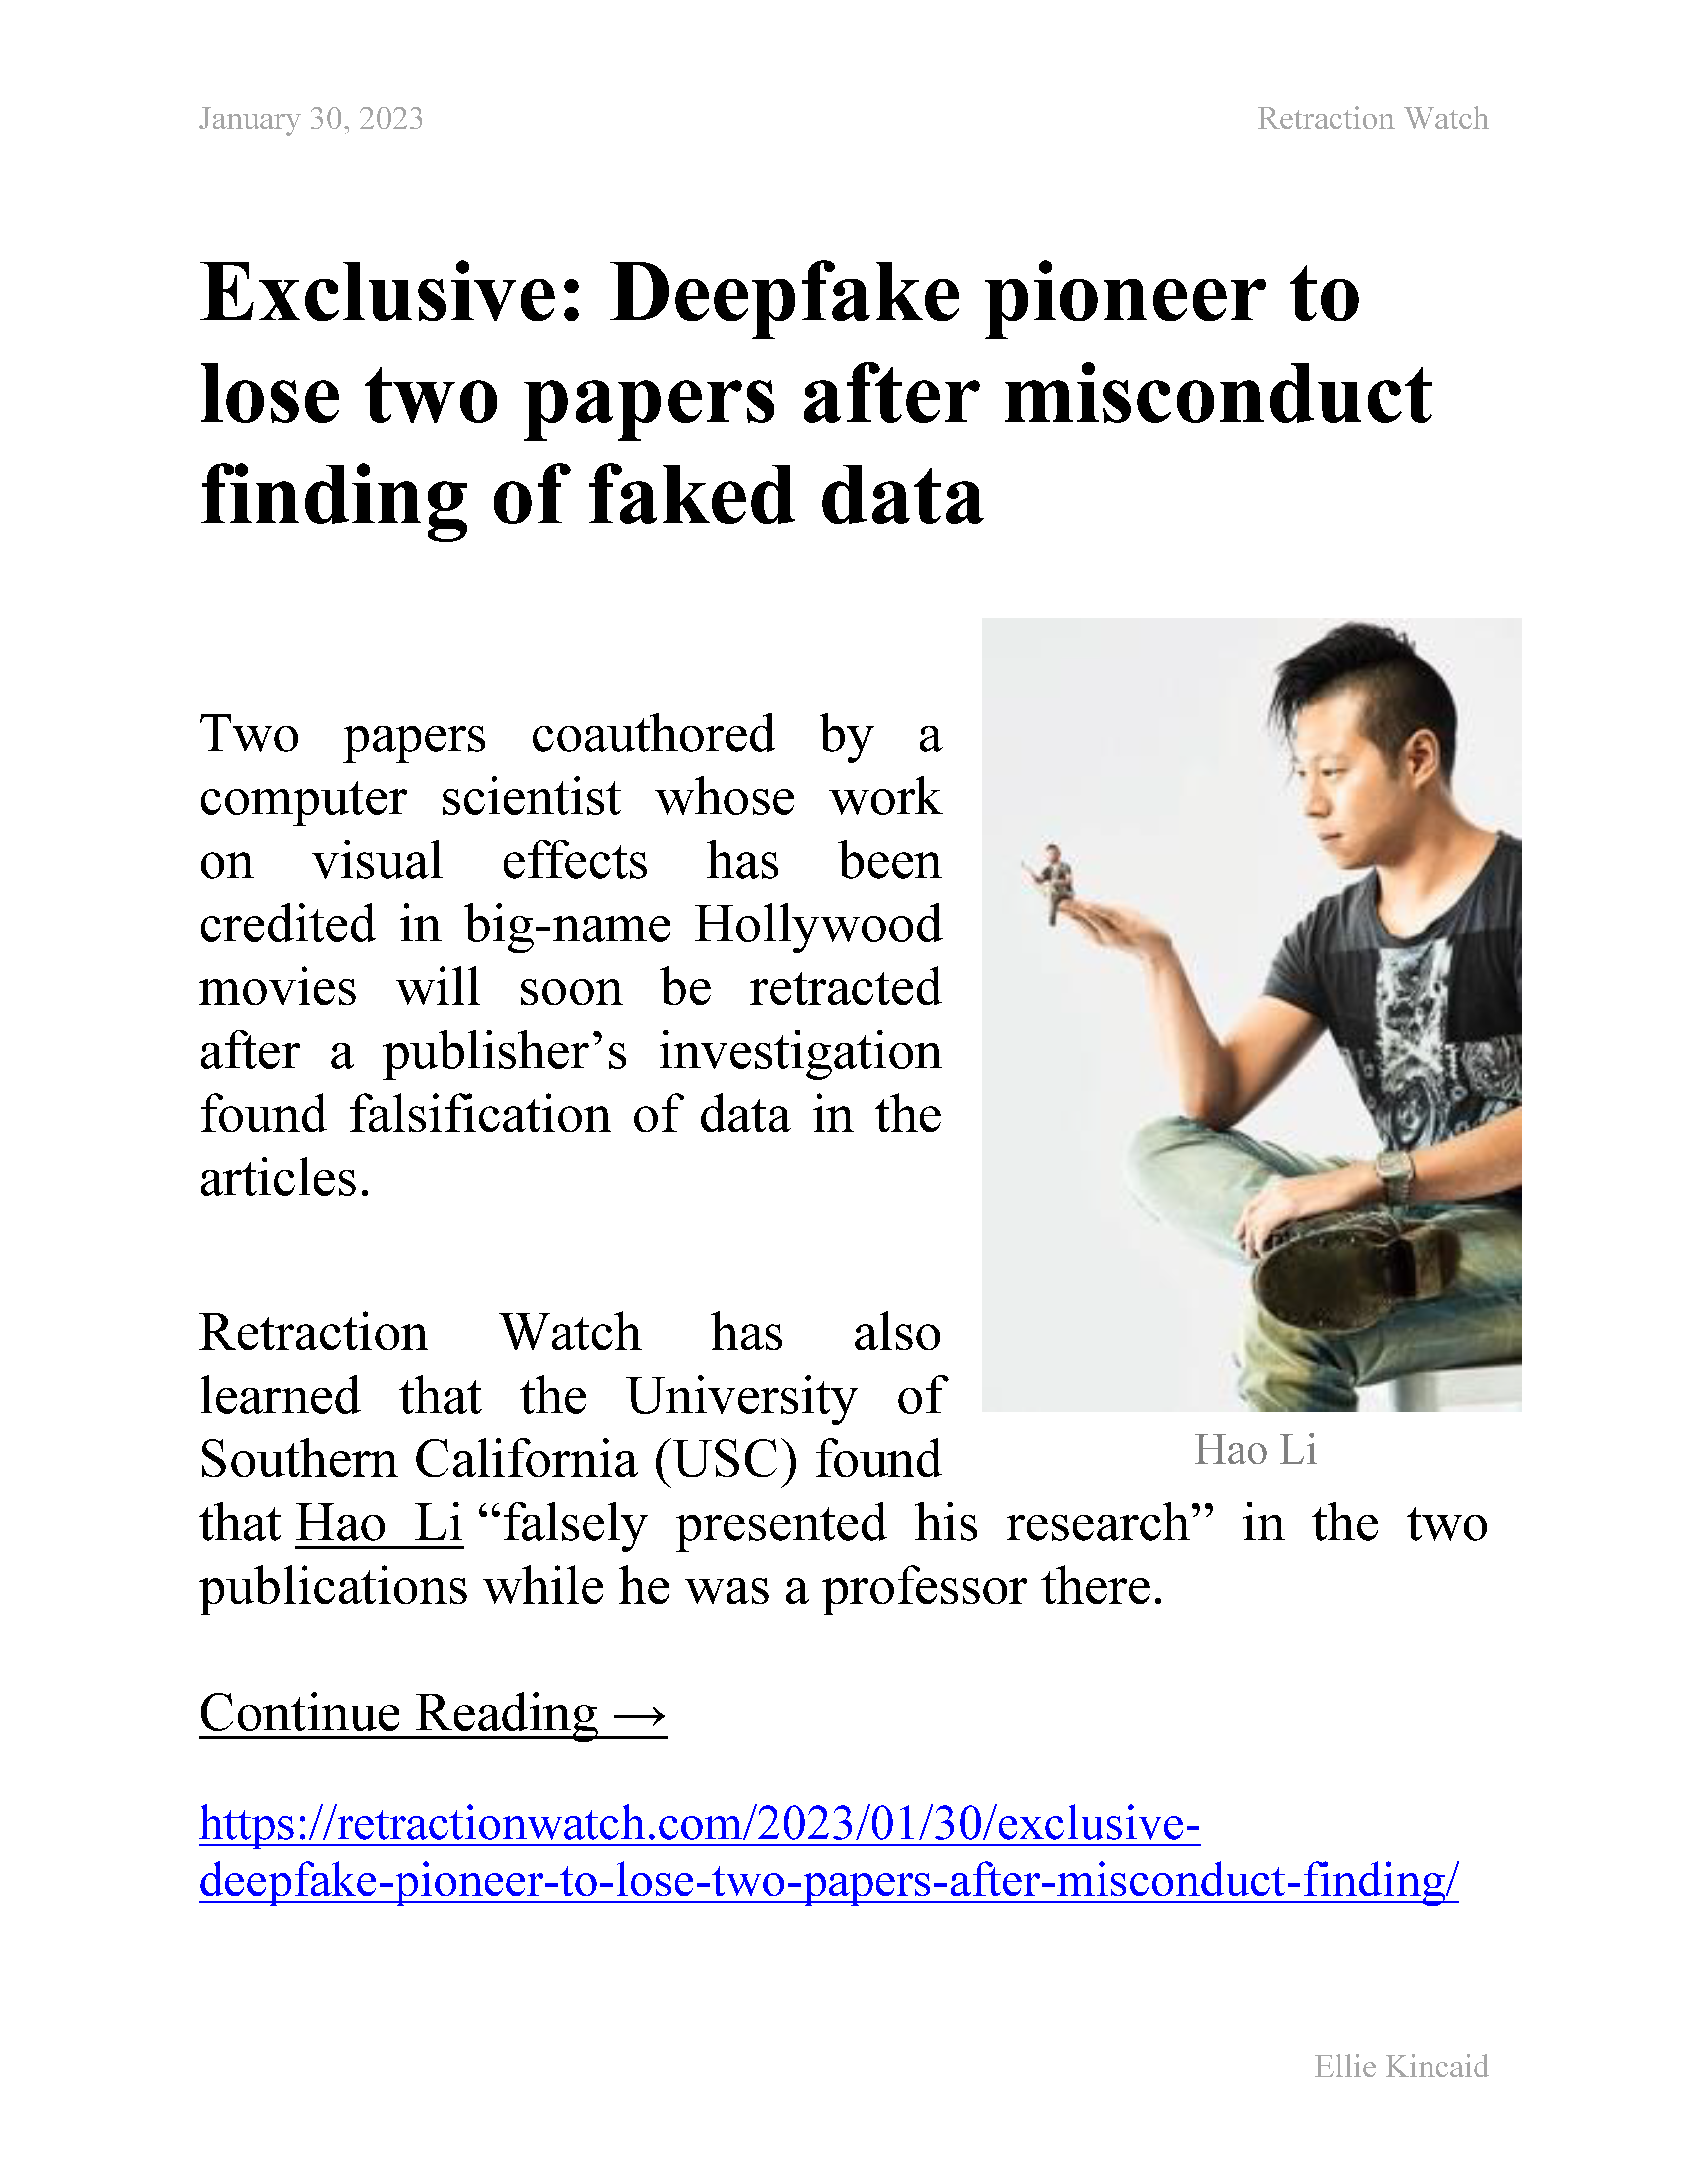 Retraction Watch's Exclusive Report on Hao Li's and Pinscreen's Scientific Misconduct Page 1